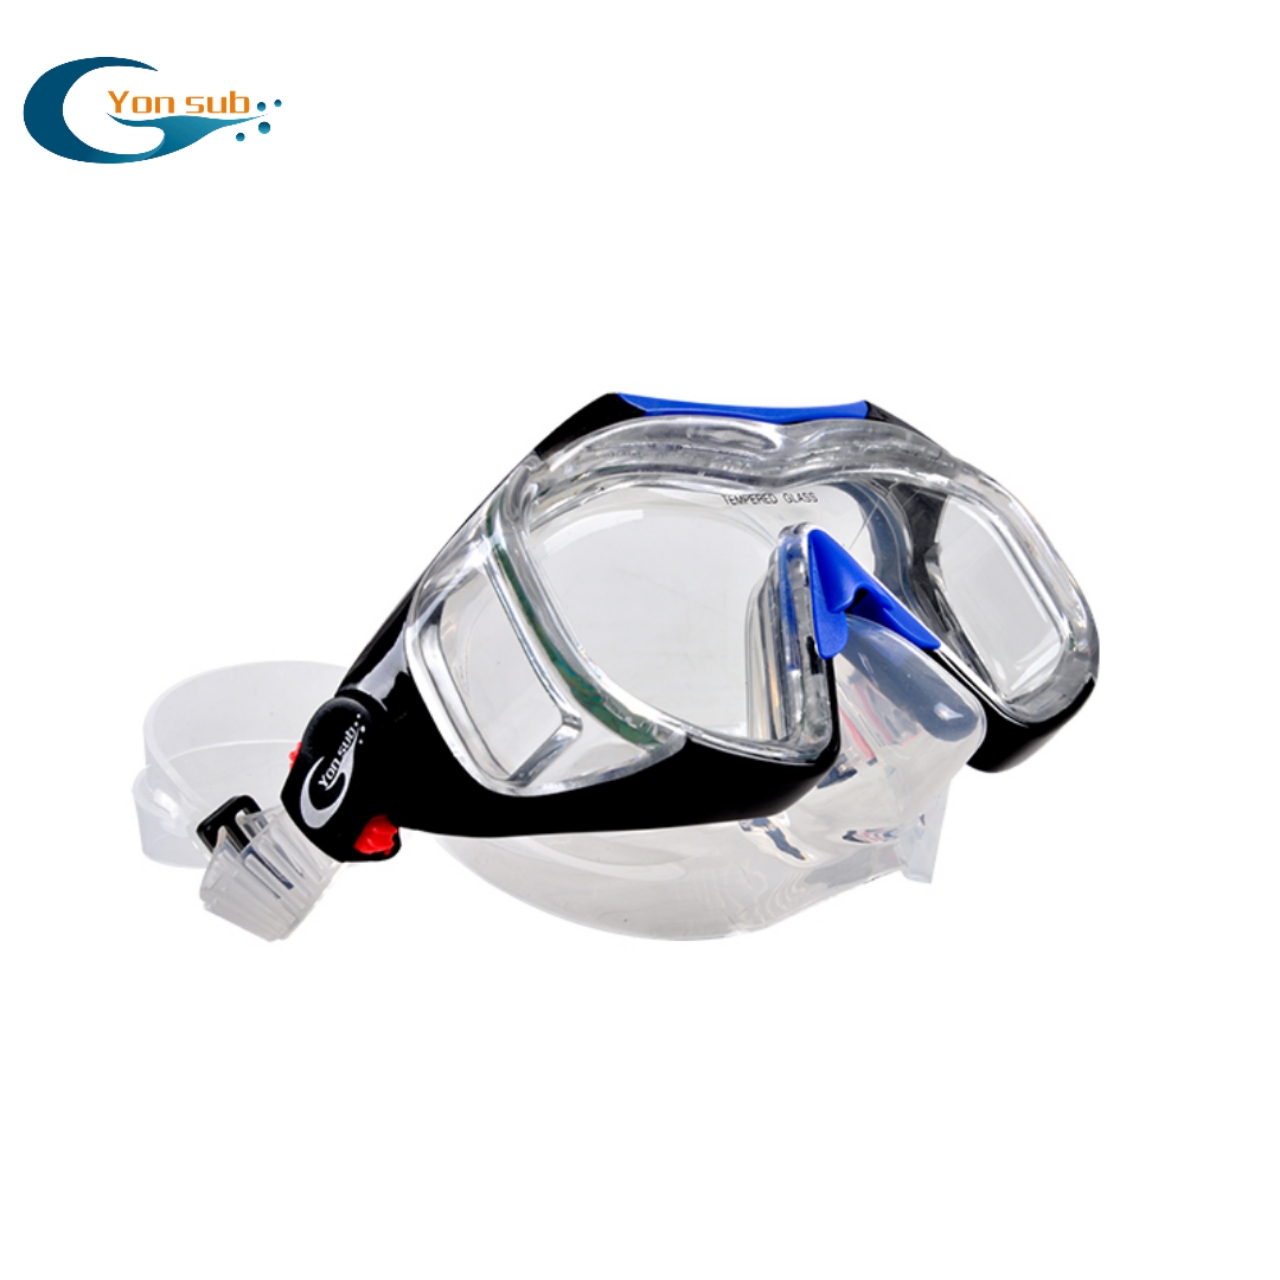 High quality 4 mm tempered glass silicone scuba diving mask for sale